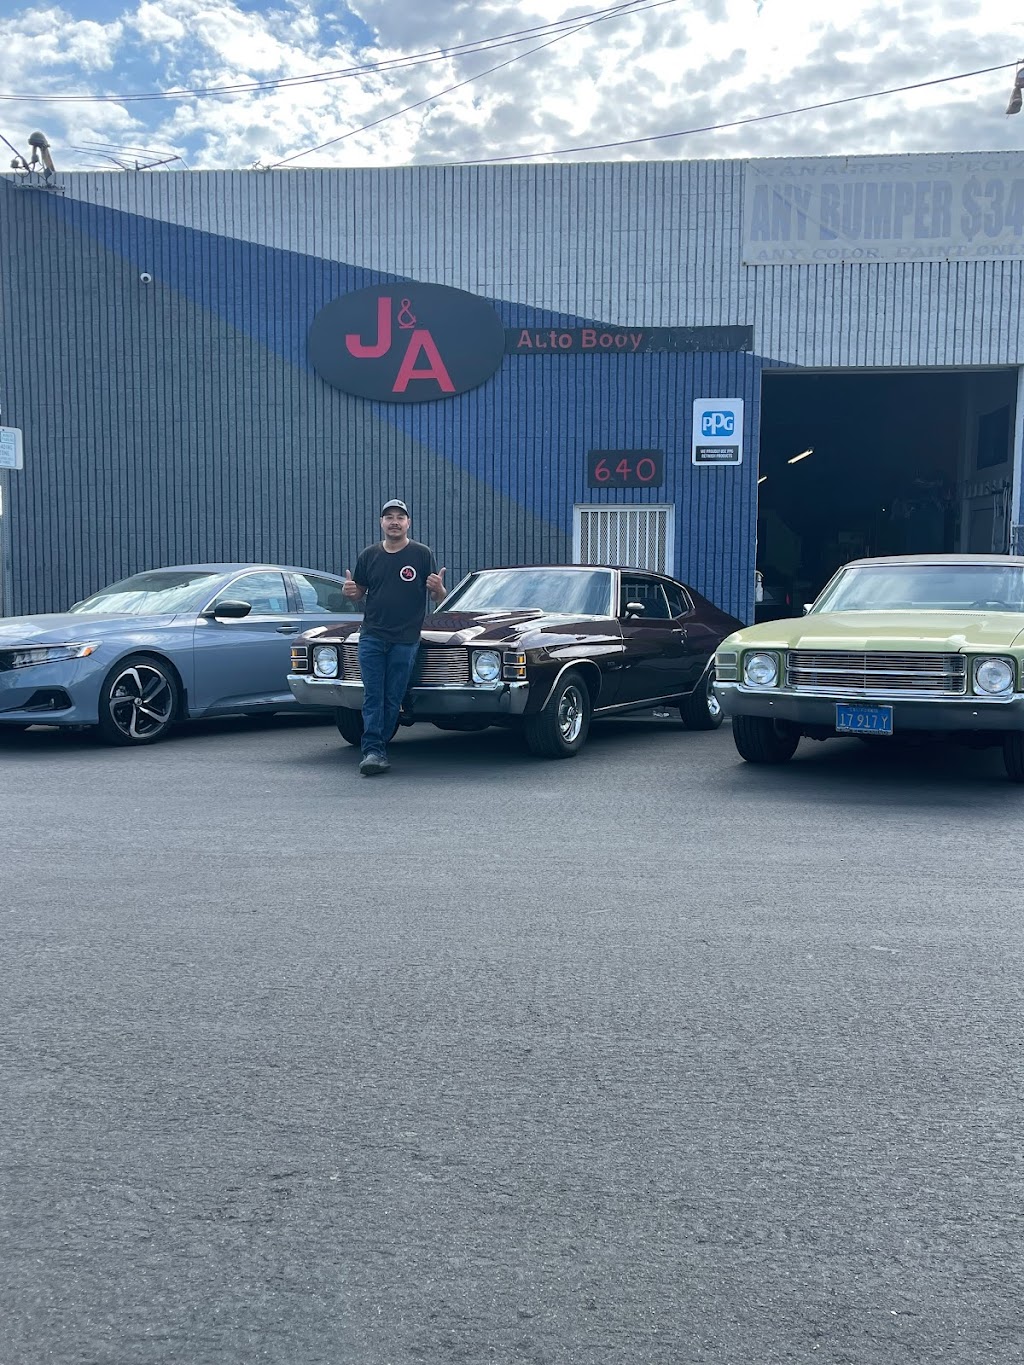 J&A Auto Body And Paint | 640 N Flint Ave, Wilmington, CA 90744 | Phone: (310) 462-6950